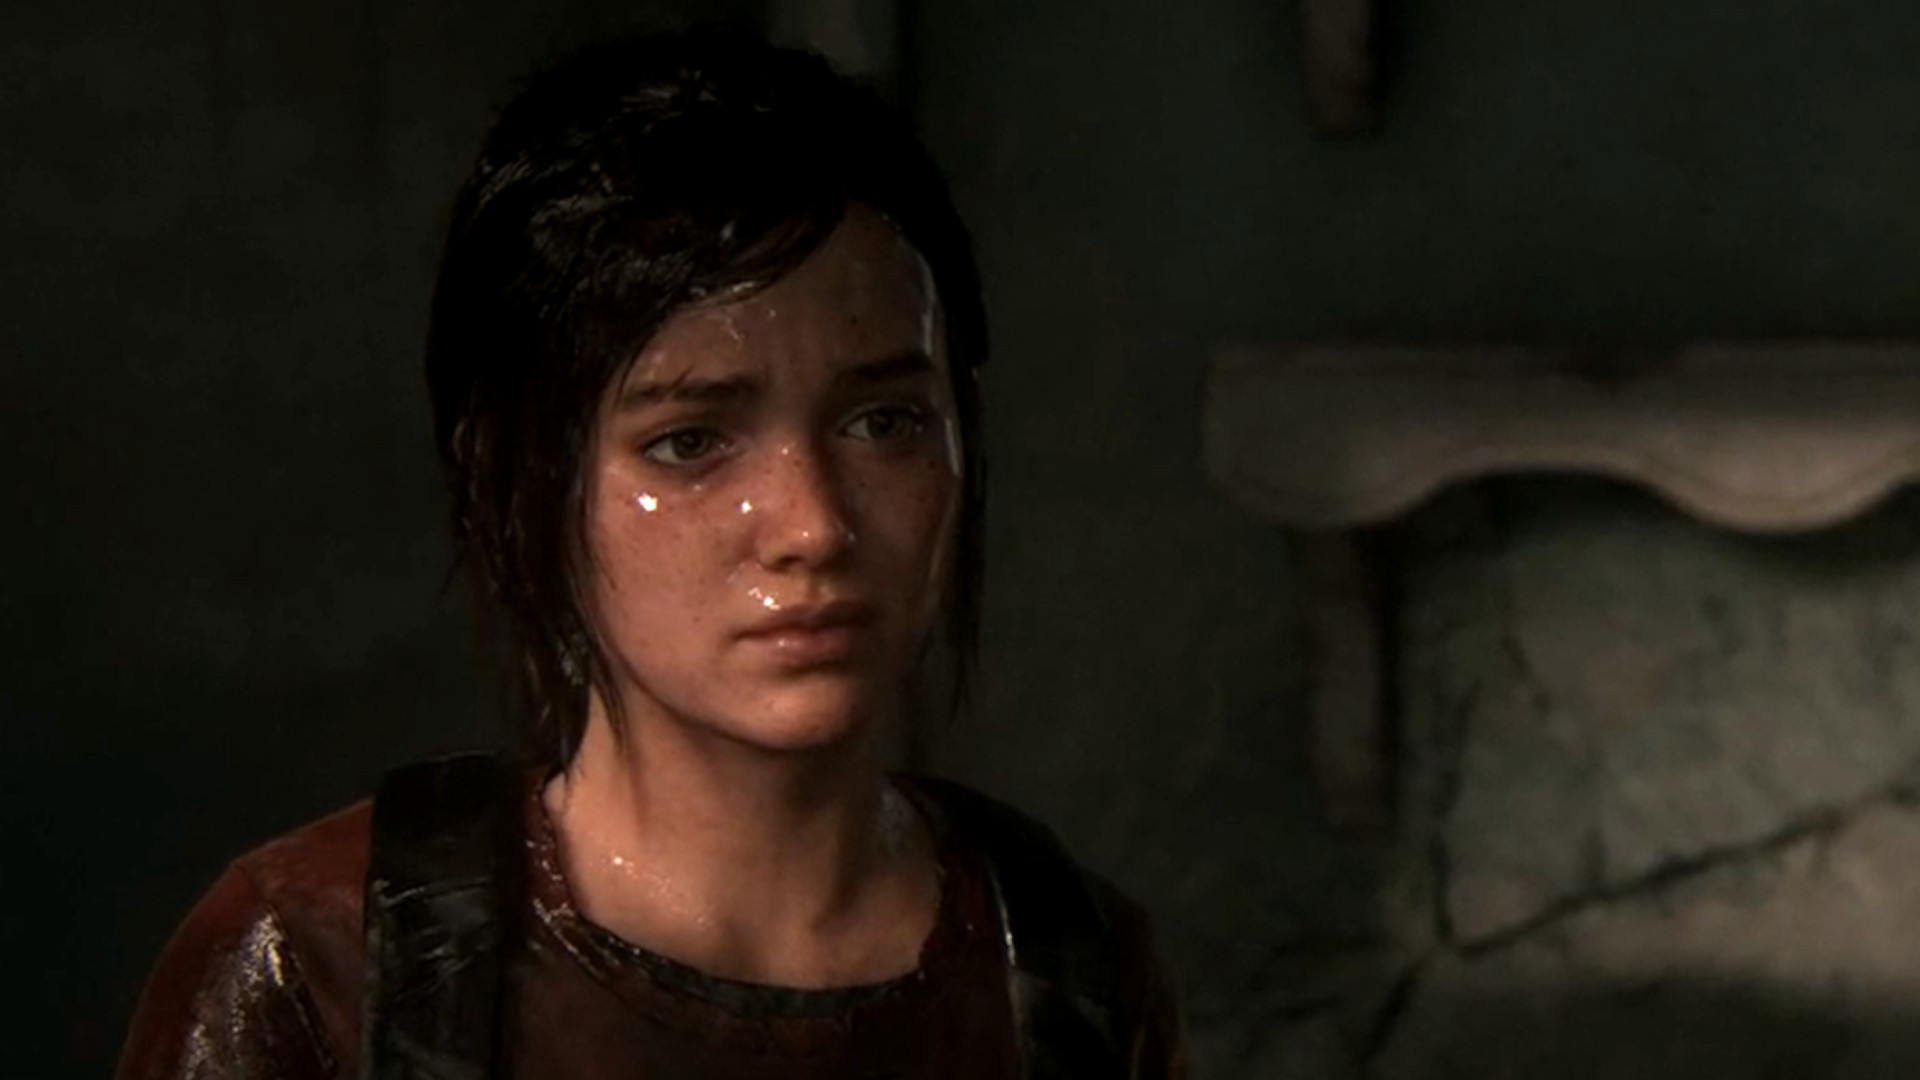 The Last of Us Part I' for PC was a buggy mess at launch